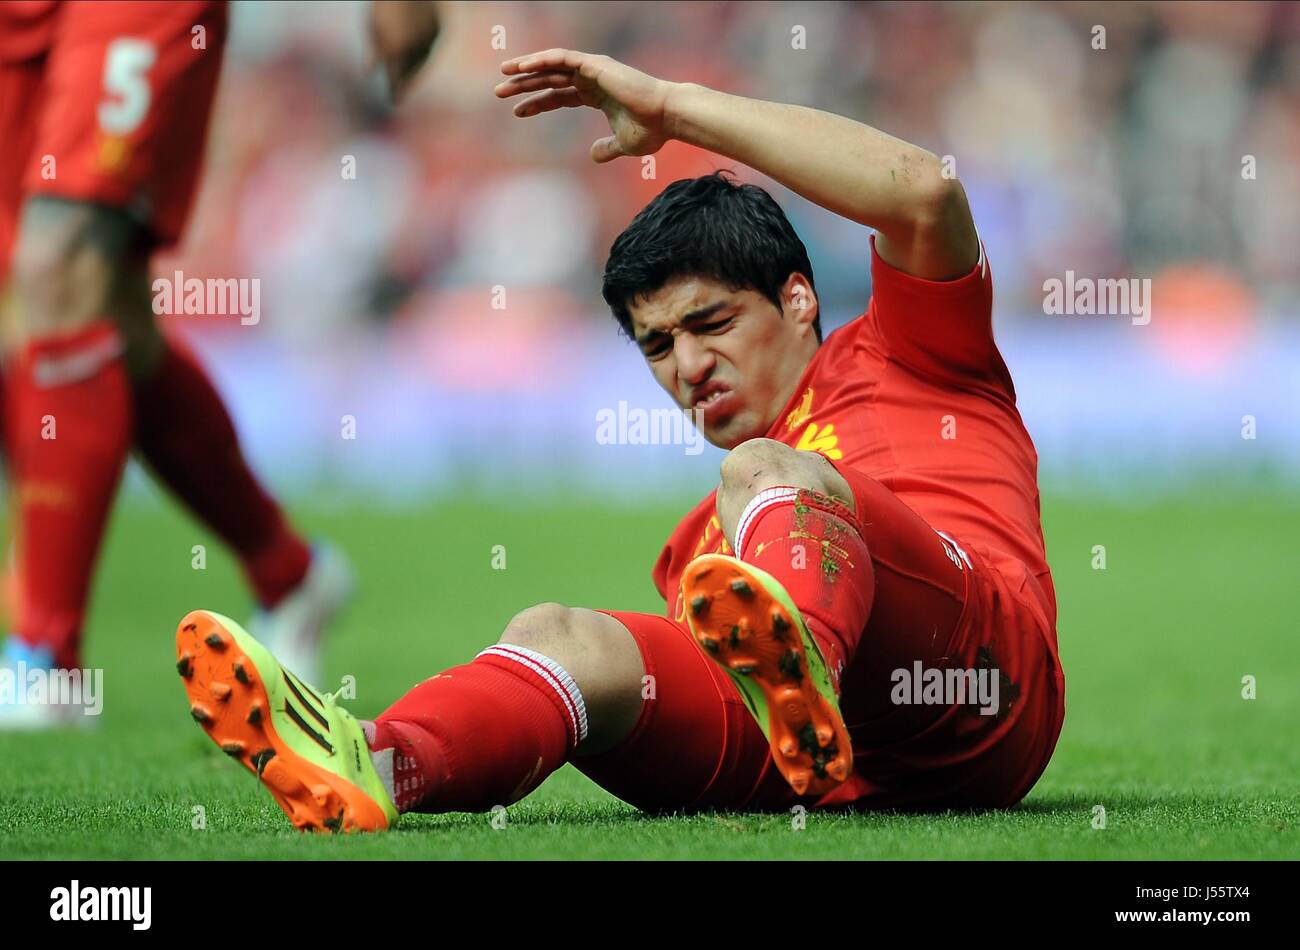 LUIS SUAREZ LIVERPOOL FC LIVERPOOL FC ANFIELD LIVERPOOL ENGLAND 11 May 2014 Stock Photo